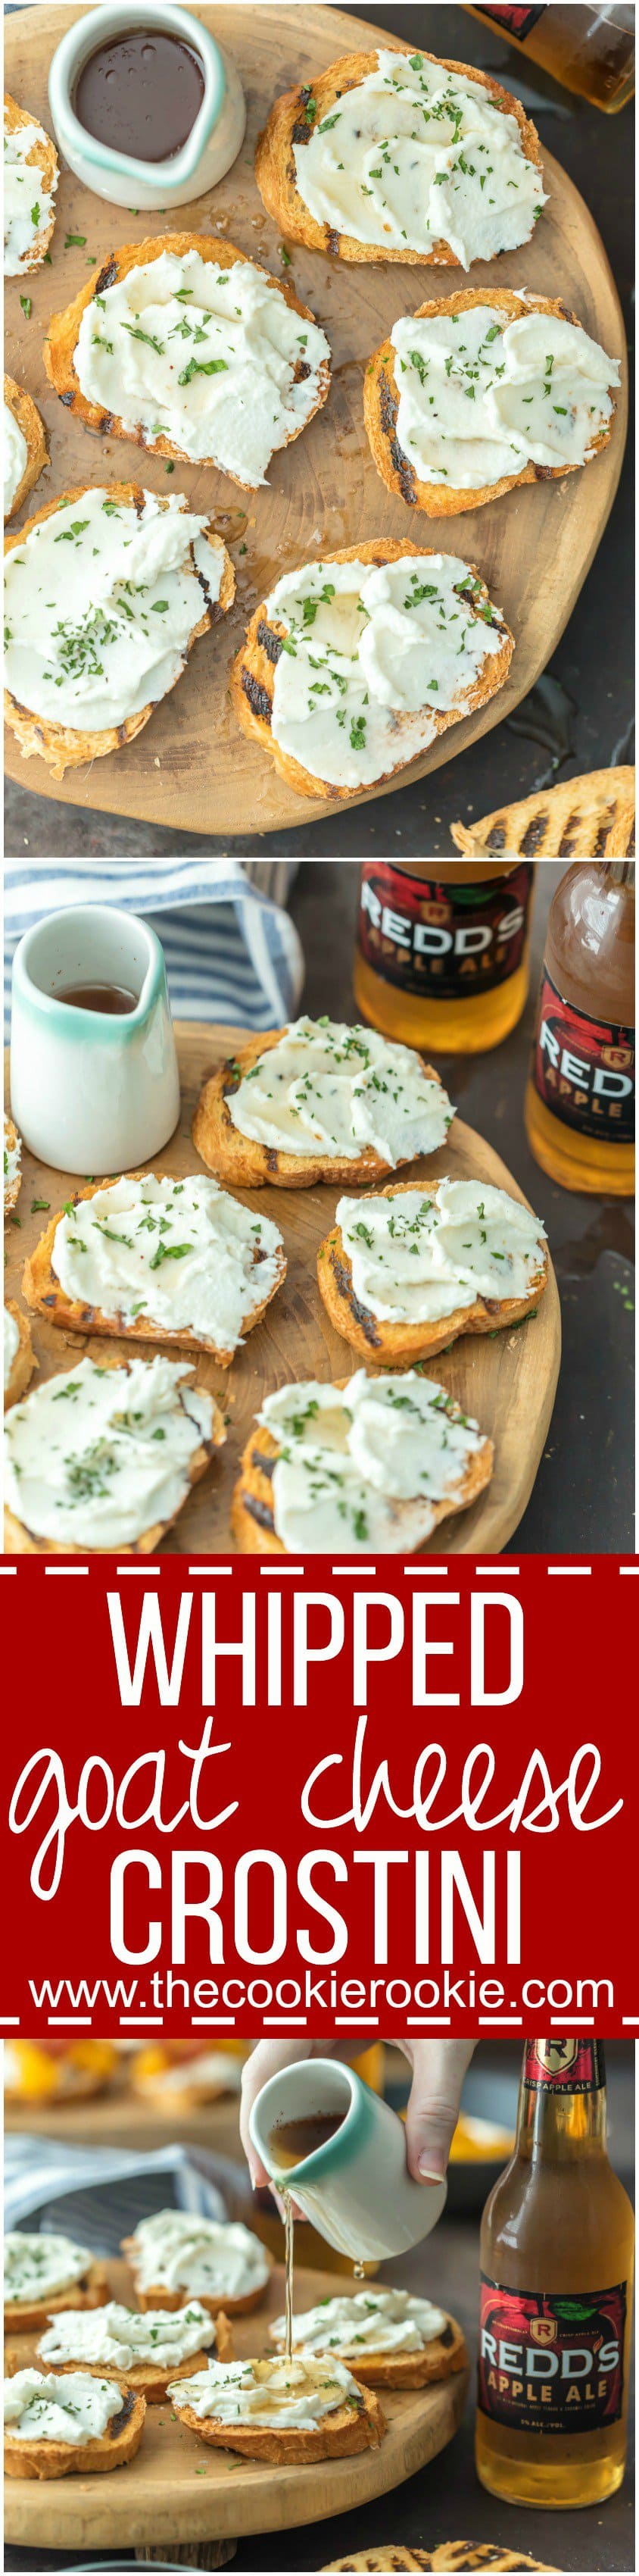 WHIPPED GOAT CHEESE CROSTINI made with an apple ale reduction is the perfect easy appetizer for any occasion. SO simple but so much flavor!!